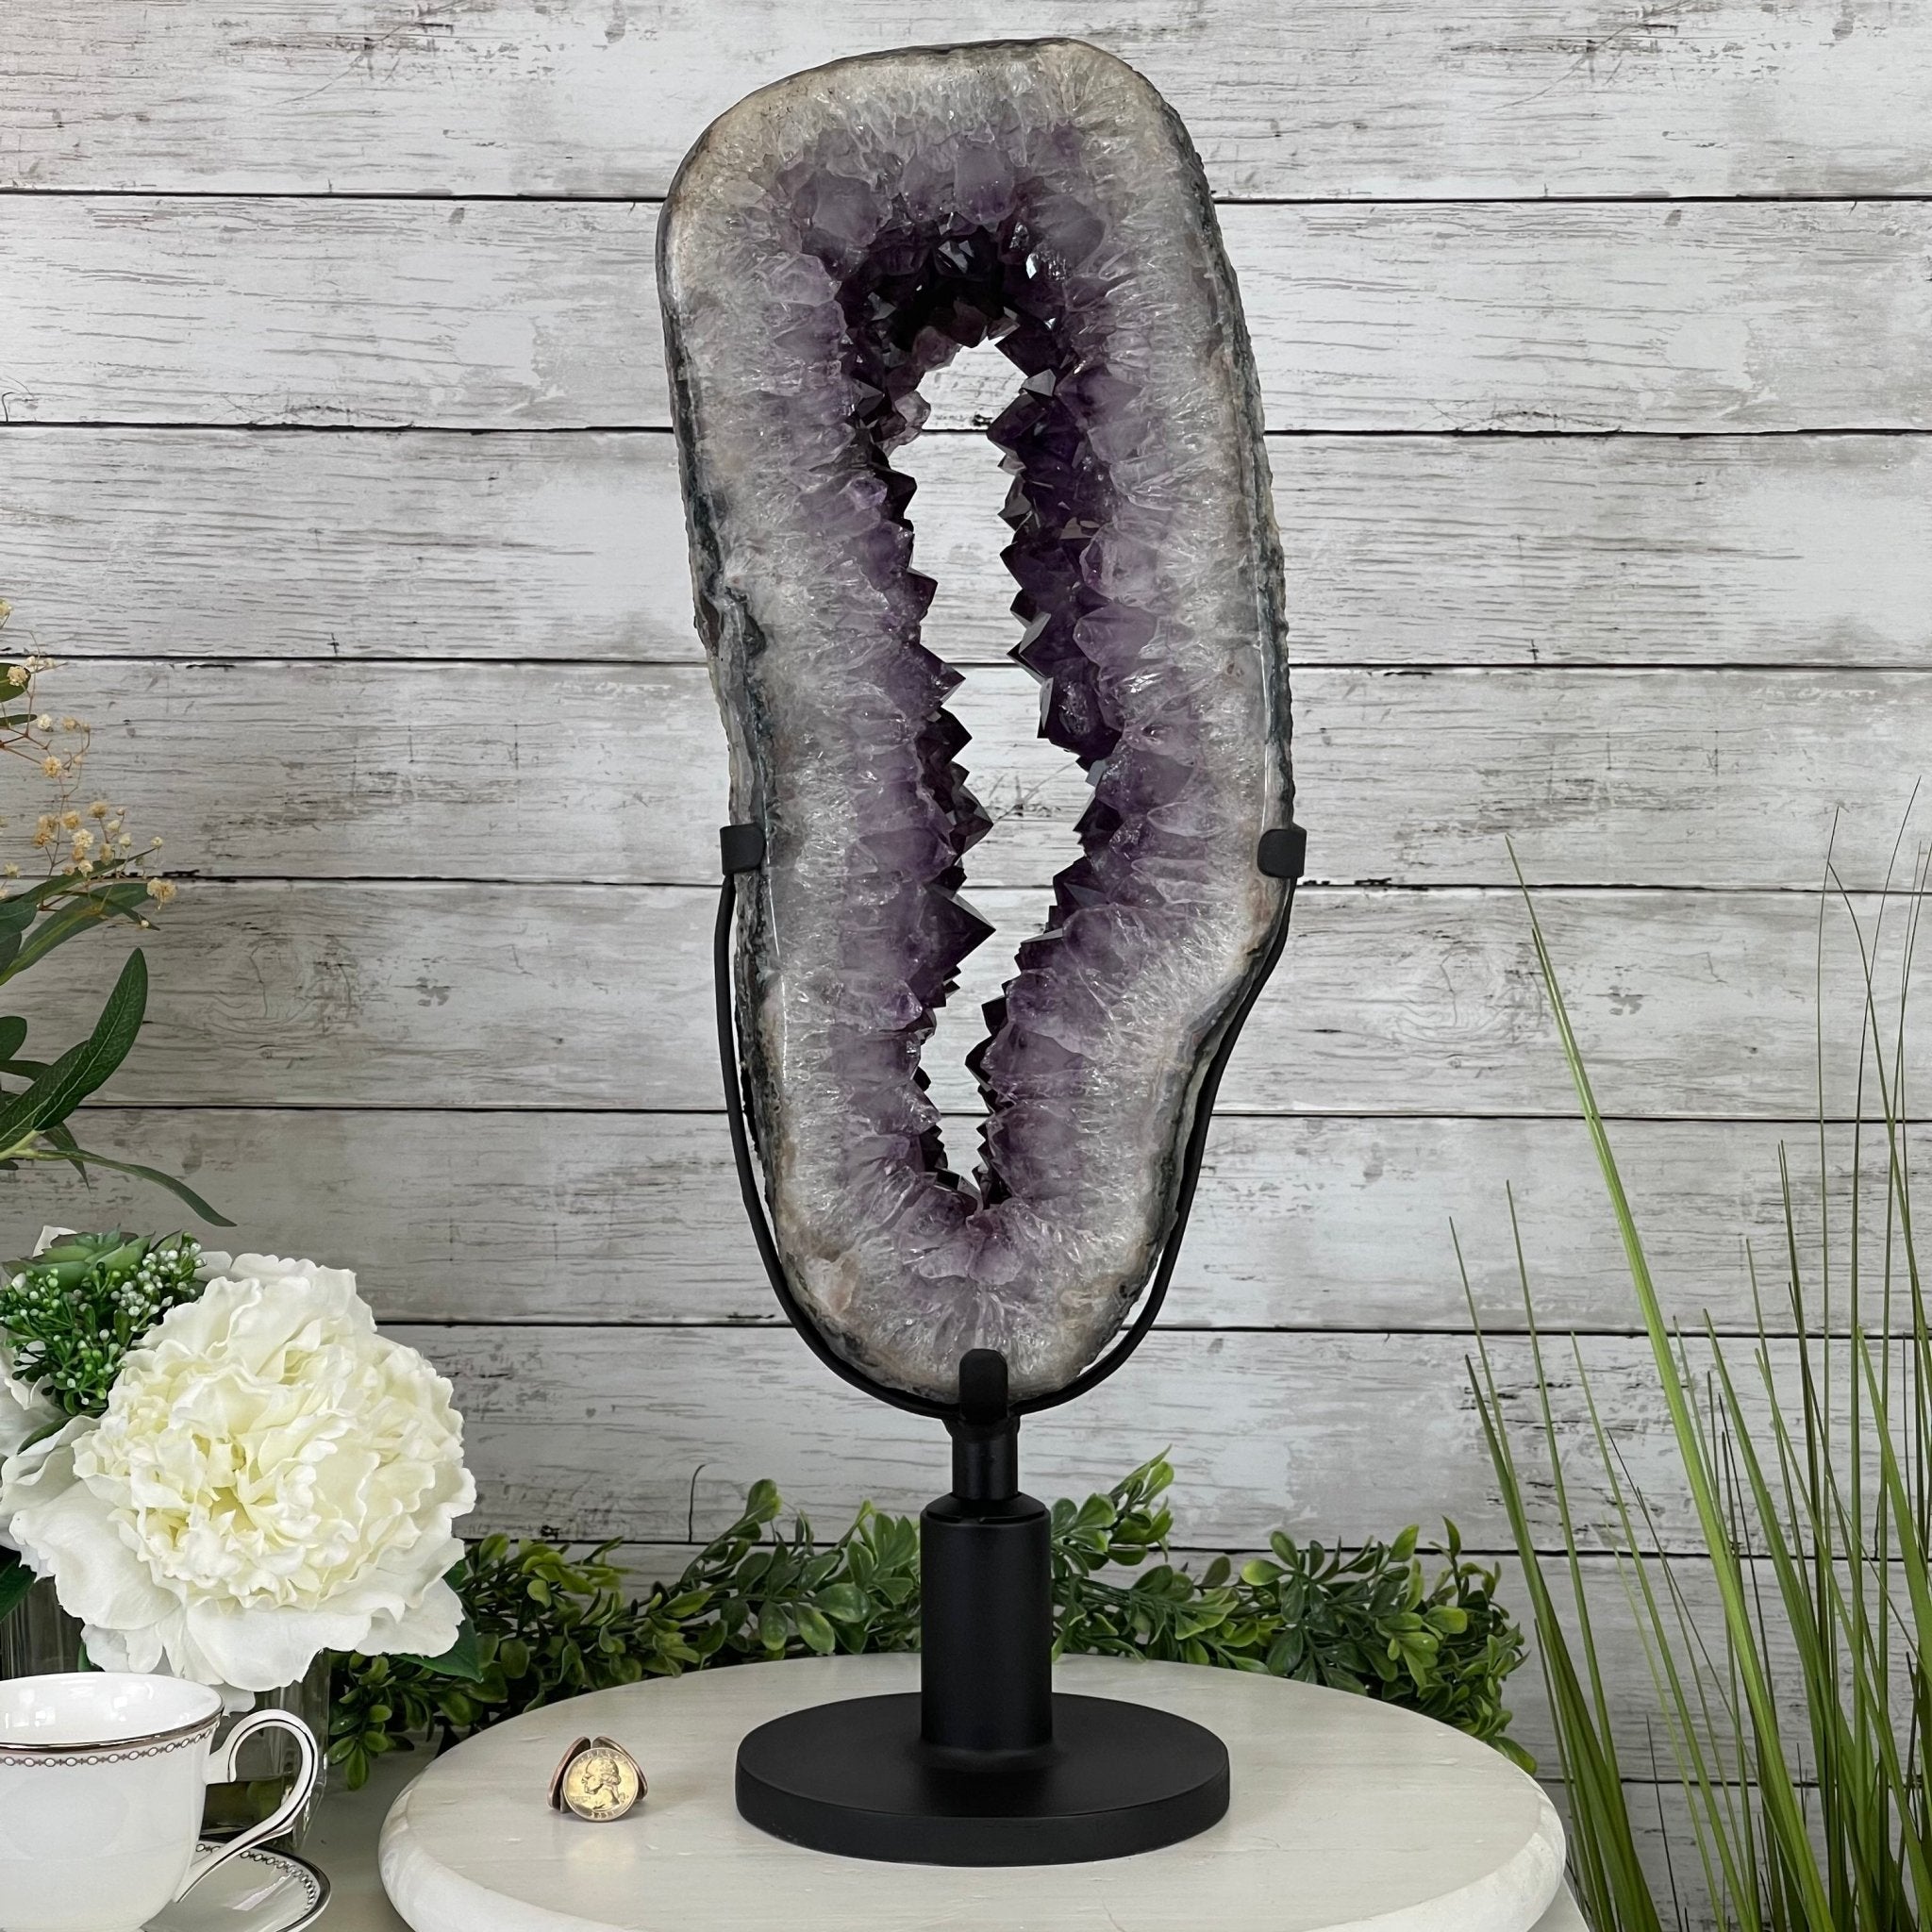 Extra Quality Brazilian Amethyst Crystal Portal on a Rotating Stand, 23.9 lbs & 22.3" tall Model #5604-0083 by Brazil Gems - Brazil GemsBrazil GemsExtra Quality Brazilian Amethyst Crystal Portal on a Rotating Stand, 23.9 lbs & 22.3" tall Model #5604-0083 by Brazil GemsPortals on Rotating Bases5604-0083